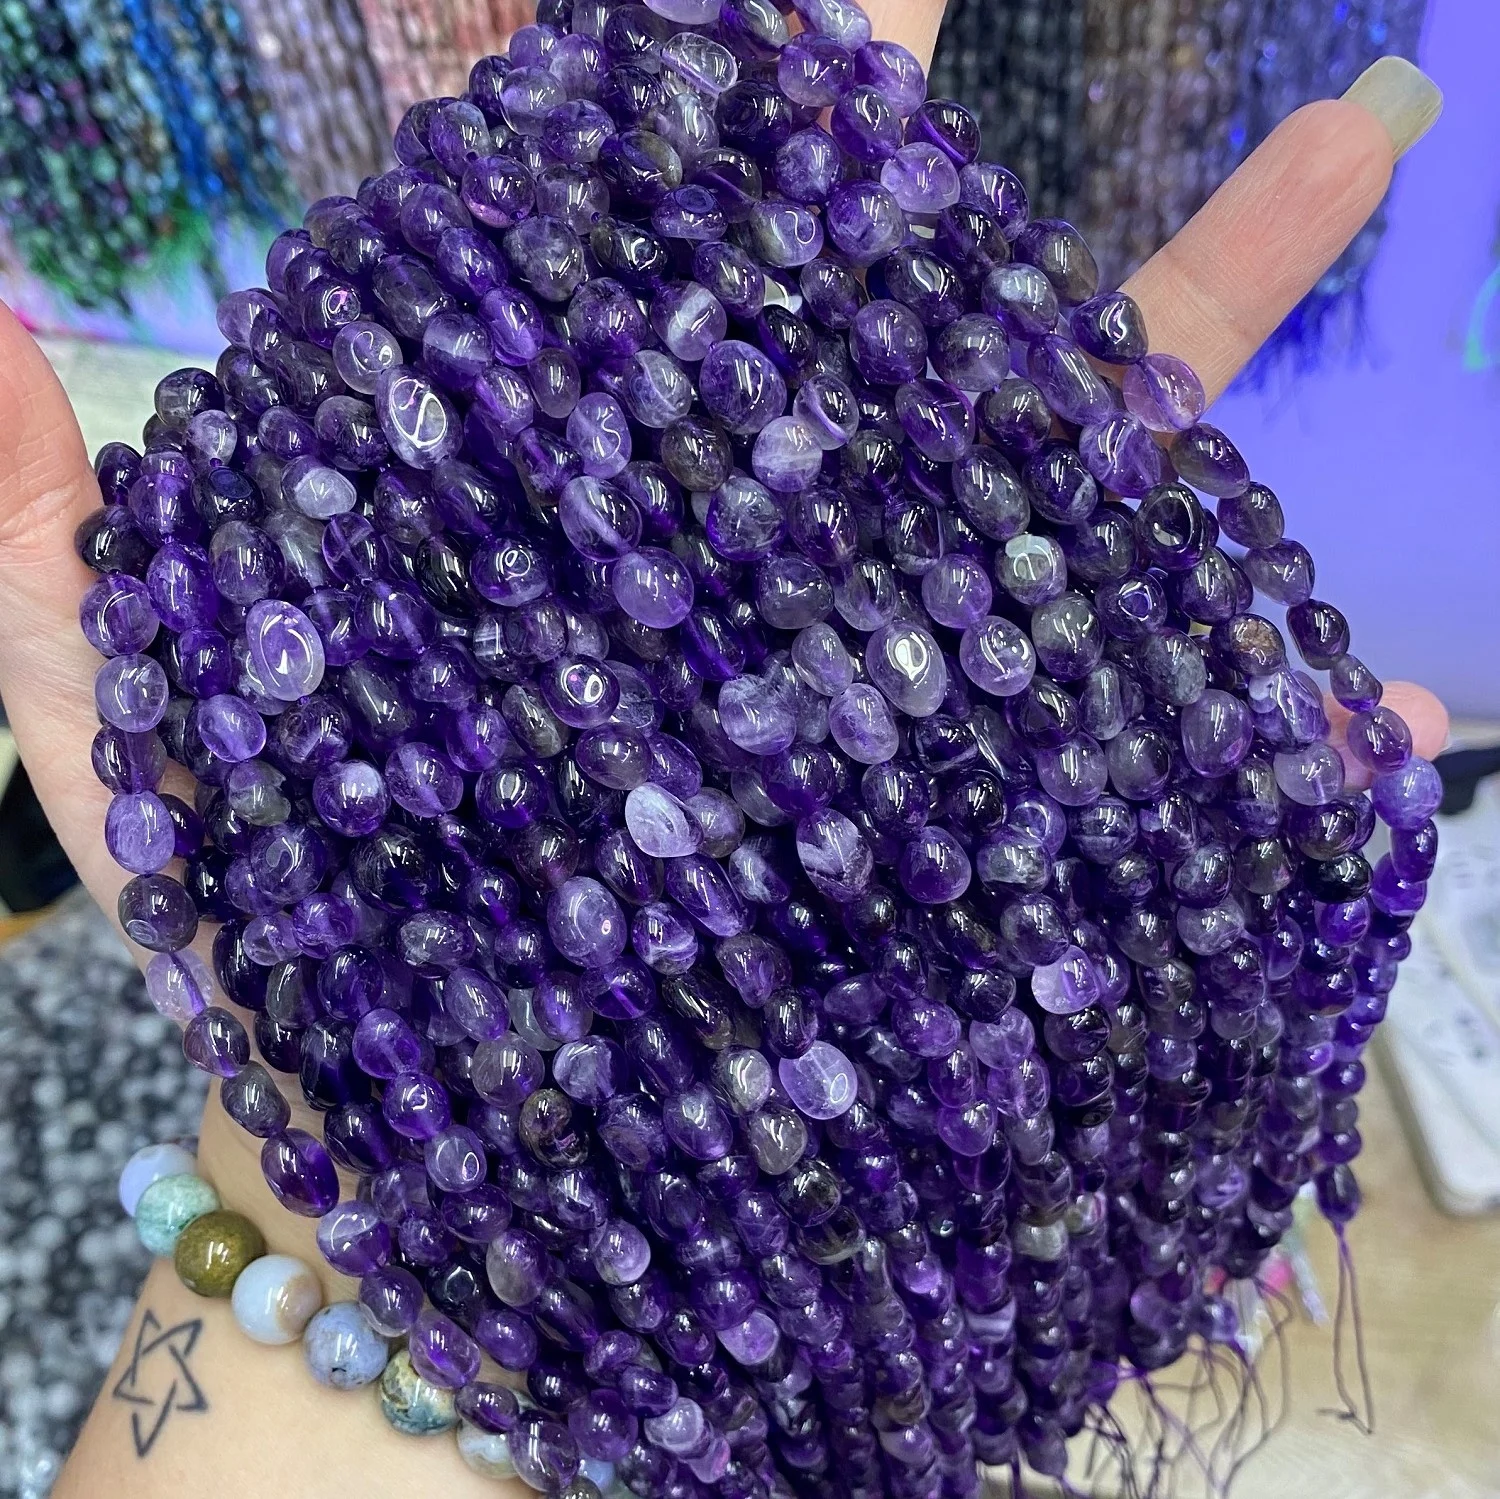 

Natural 8-10mm Amthyst Irregular Shape Beads Gravel Pebble Gemstone Beads Healing Energy for Jewelry Making 15" Strand, 100% natural color